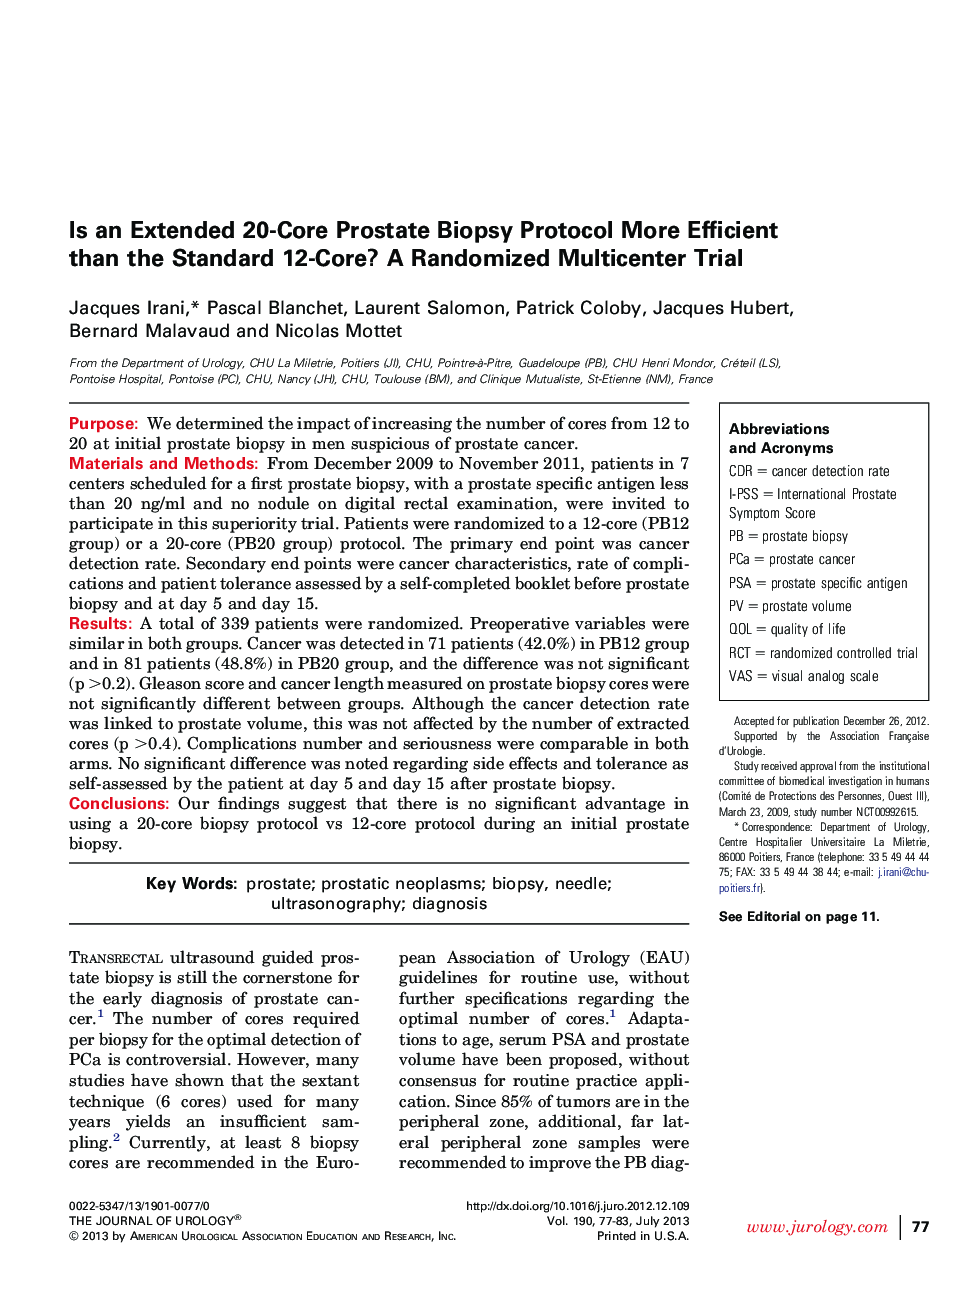 Is an Extended 20-Core Prostate Biopsy Protocol More Efficient than the Standard 12-Core? A Randomized Multicenter Trial 